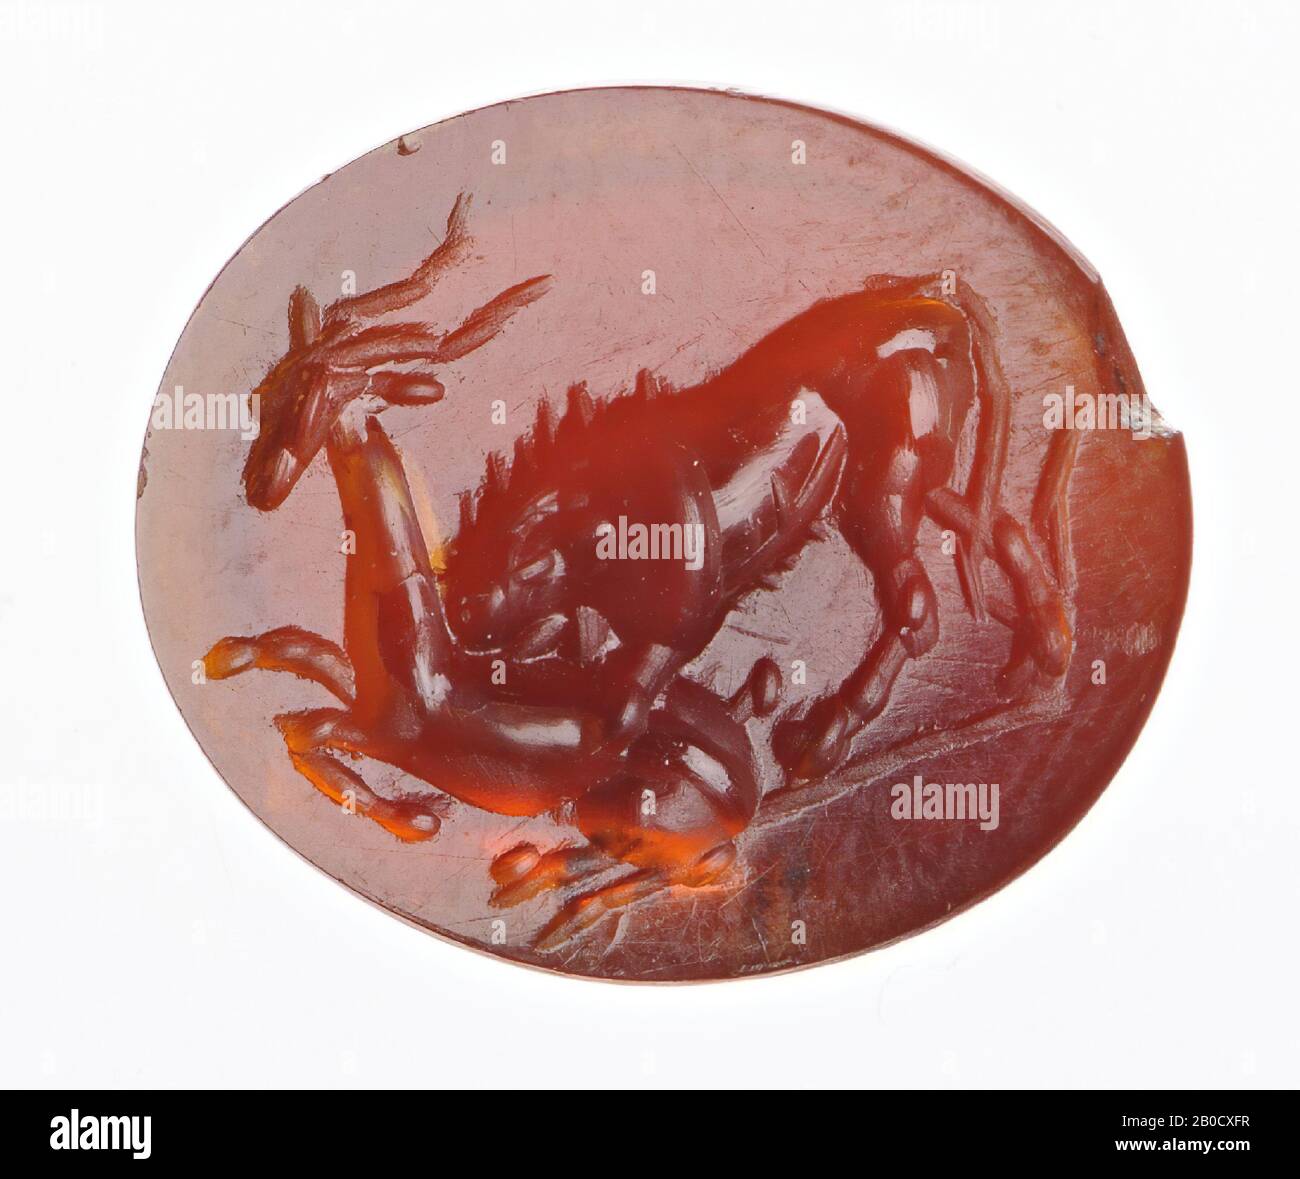 Vz: a lion bends over a fallen deer and eats it., Gem, intaglio, ring stone, carnelian, Color: brown-red, Shape: oval, Processing: edge cut at the front compared to the rear, : modeling with thick and thin rounded drill, 13 x 10.5 mm, D. 2.5 mm, 1st century AD. 1-100 AD Stock Photo